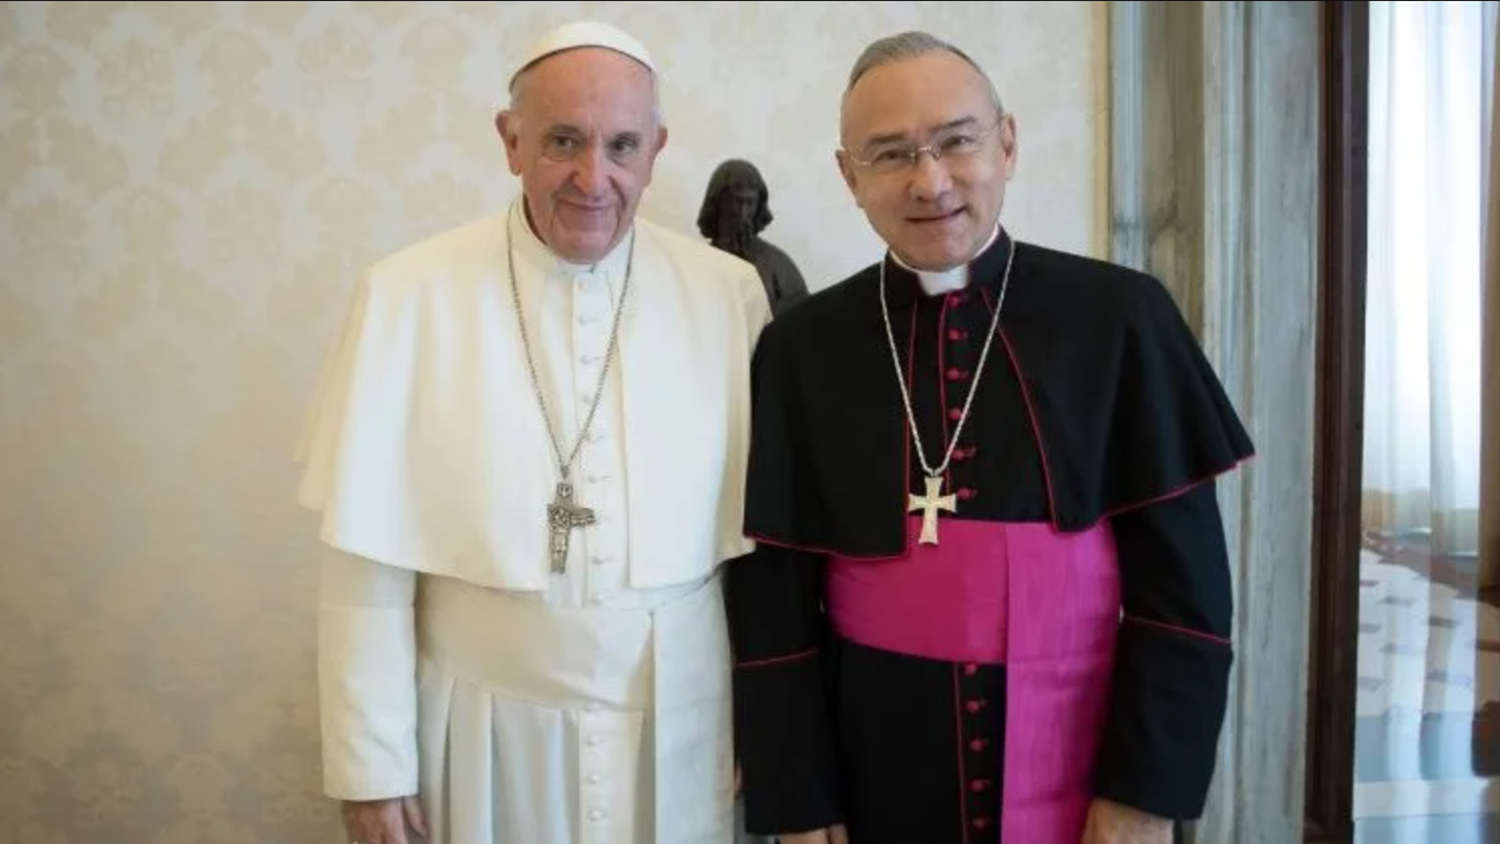 Pope Francis, left, with Archbishop Edgar Peña Parra in 2018. (Photo by Vatican News)